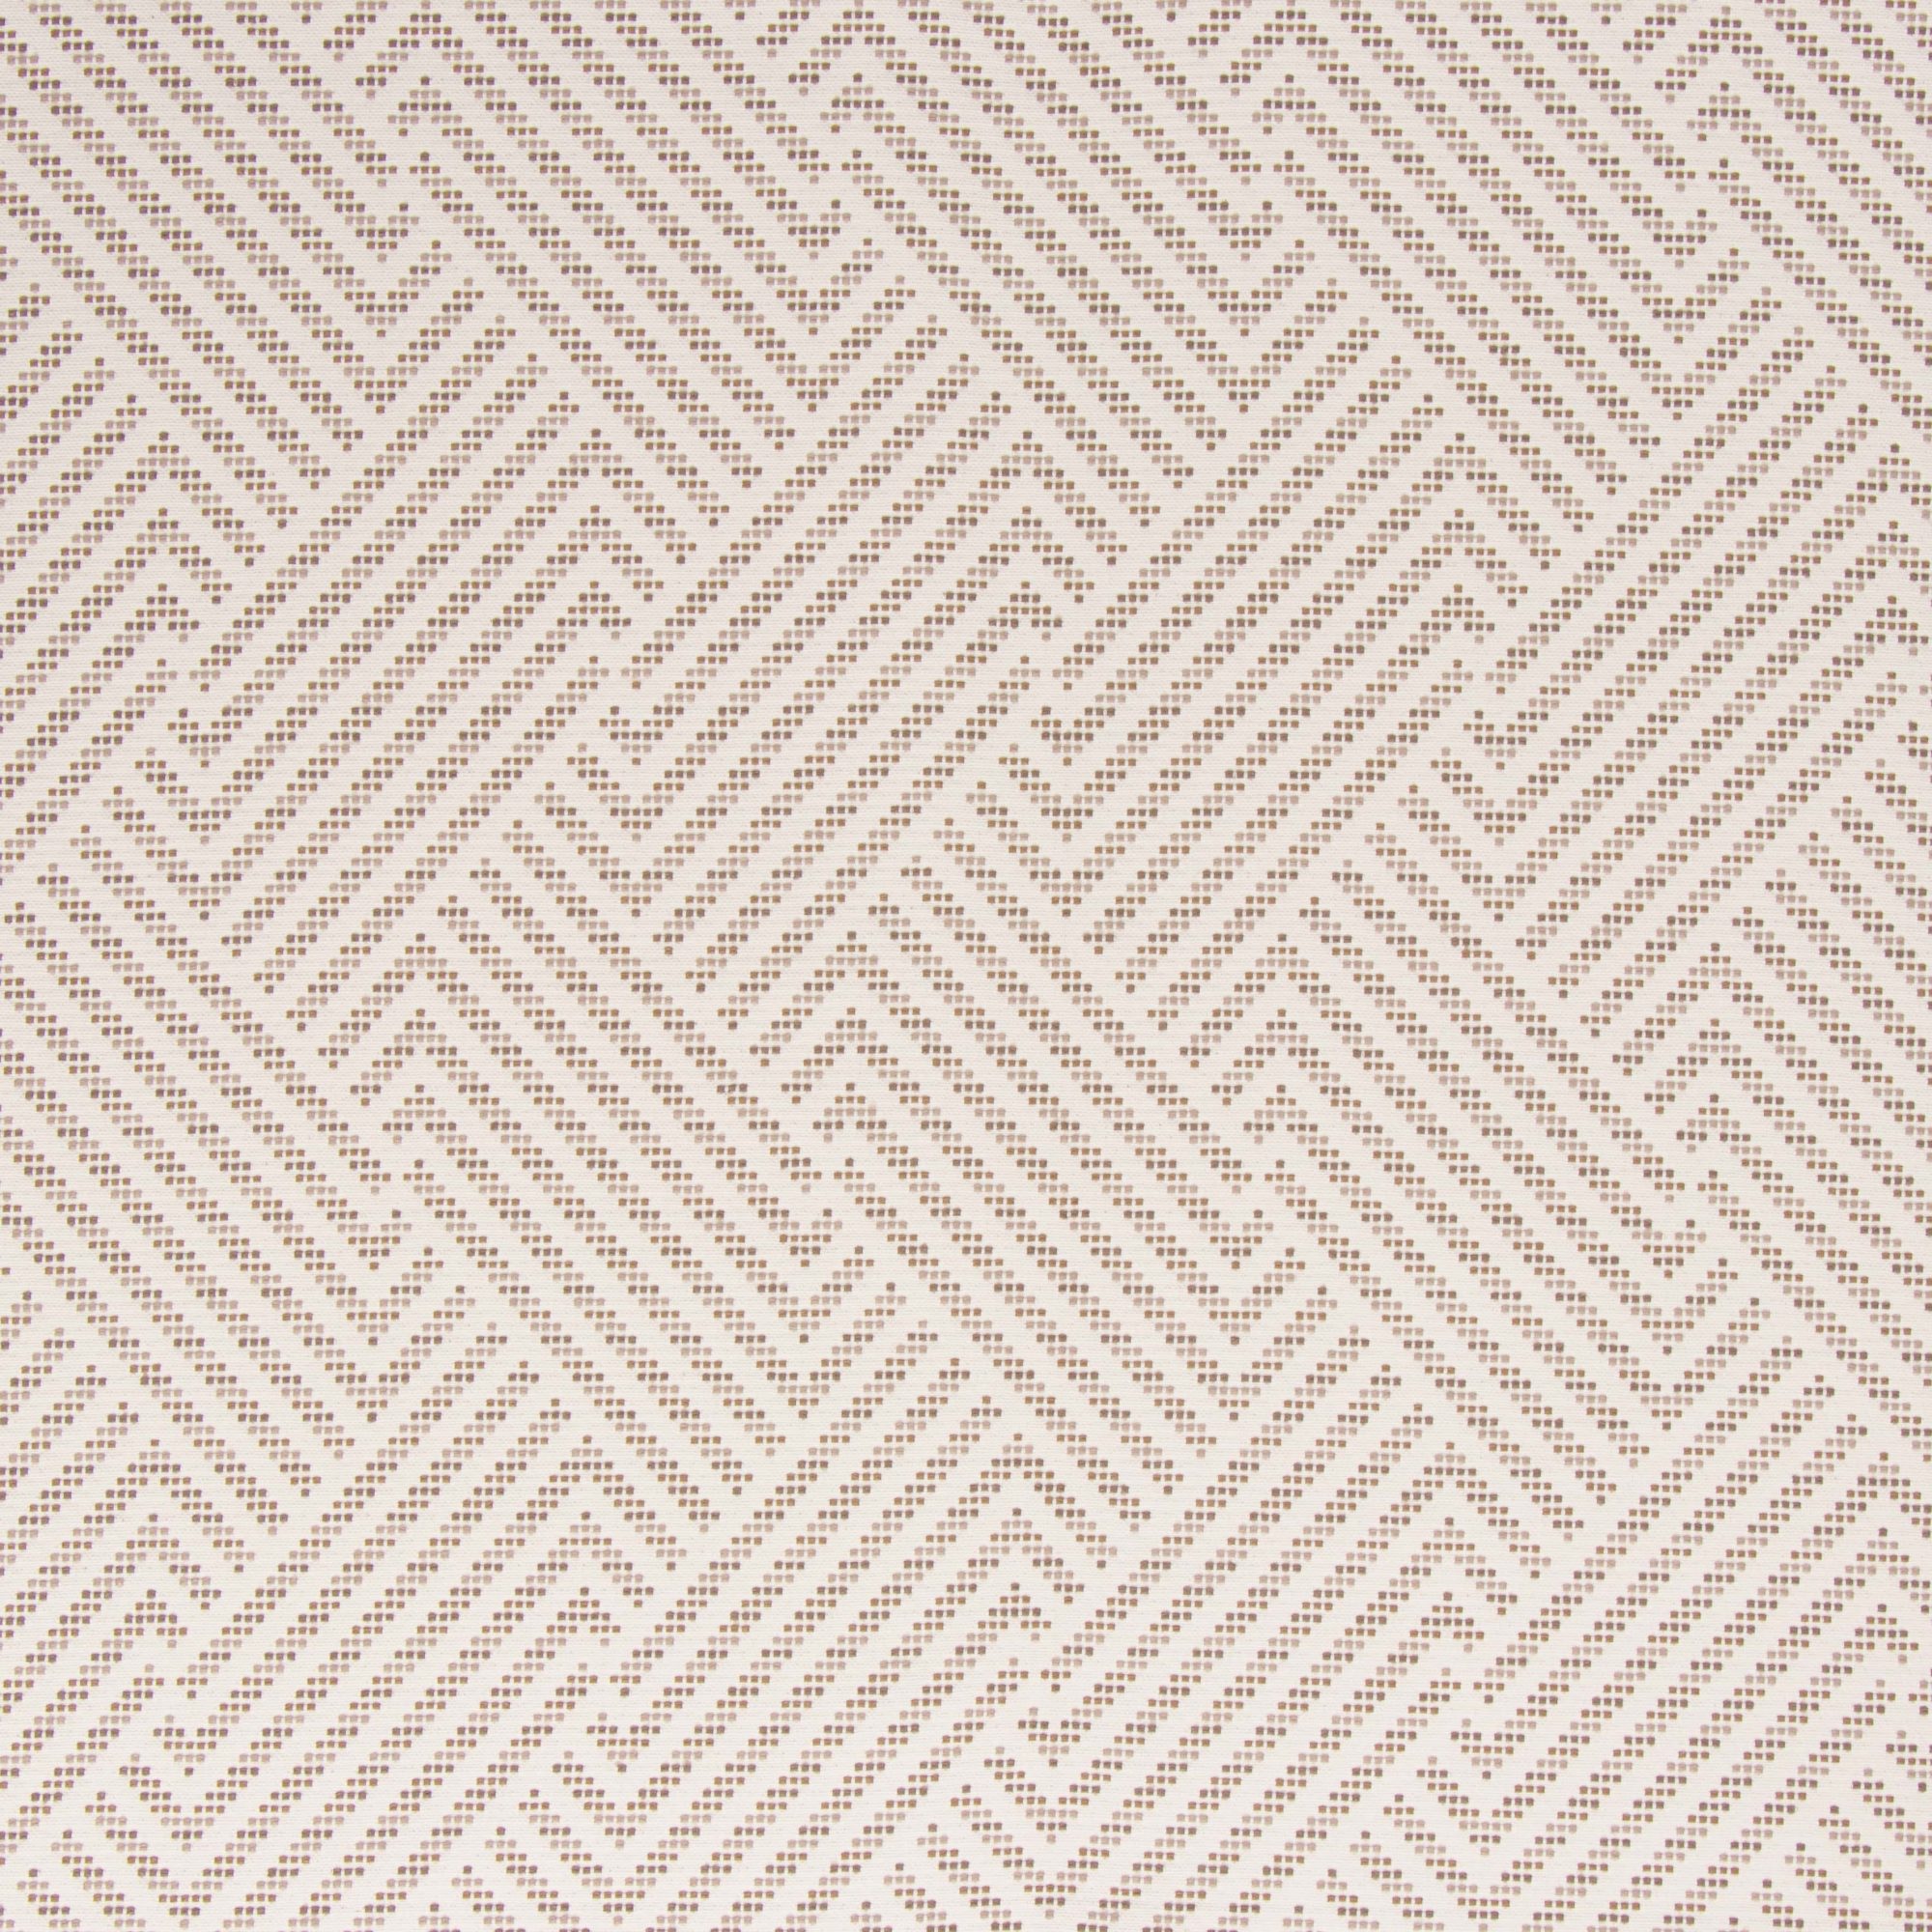 Cut yardage in the pattern Trivoli and the color Walnut from Bella Dura and Bella Dura Home.